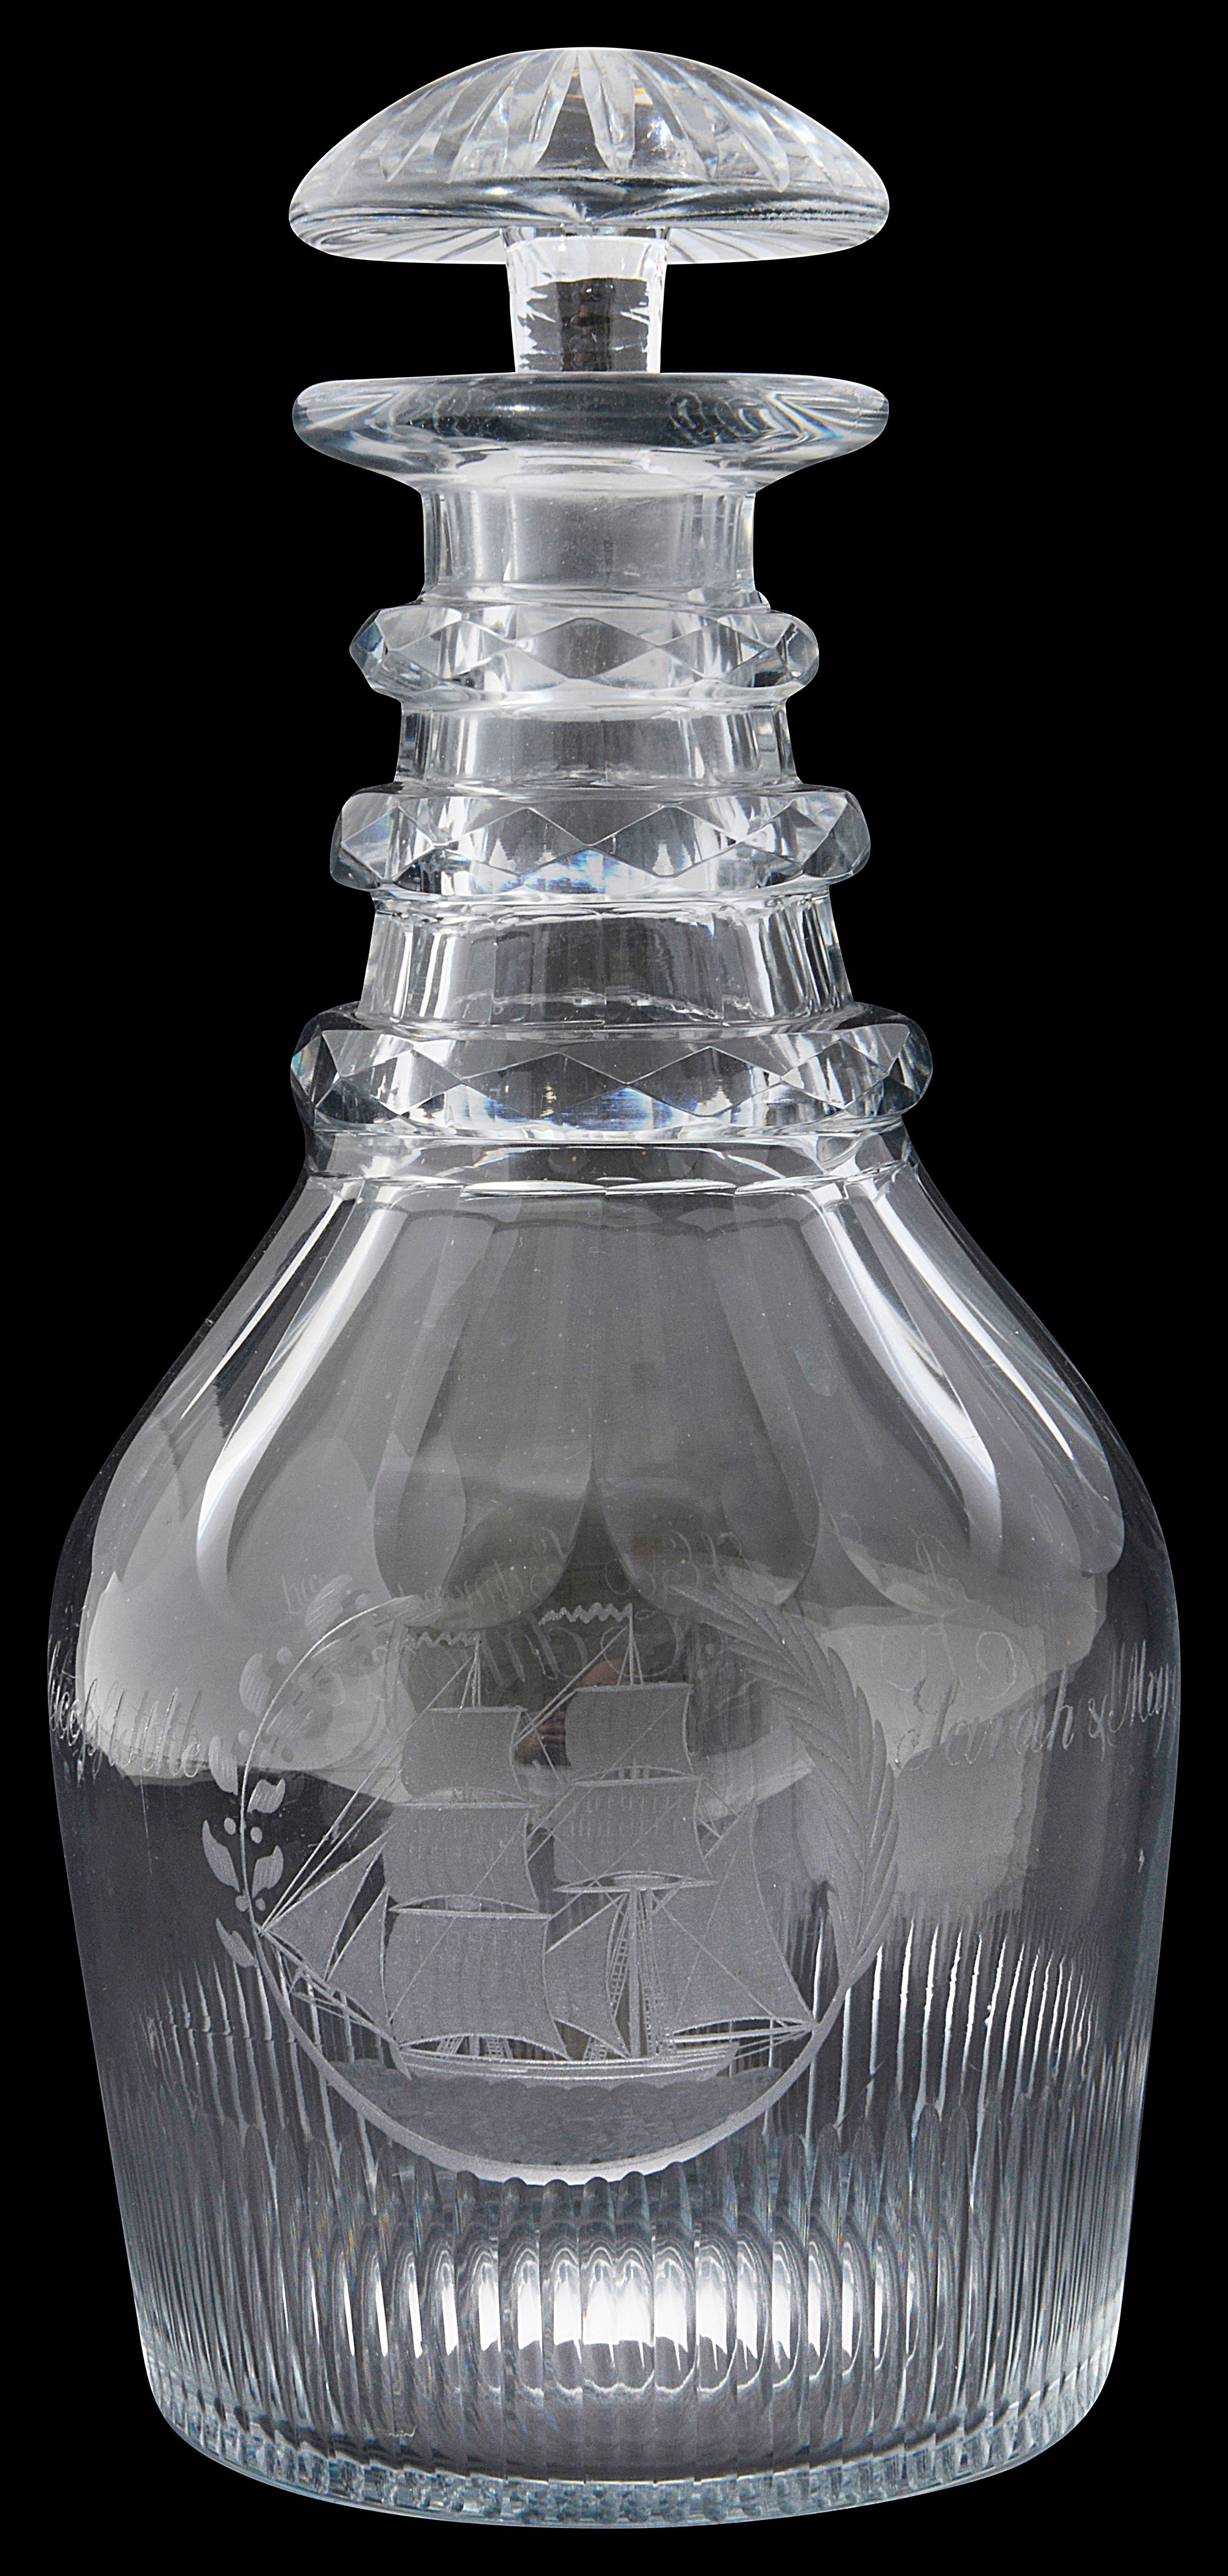 An early 19th century engraved decanter and stopper